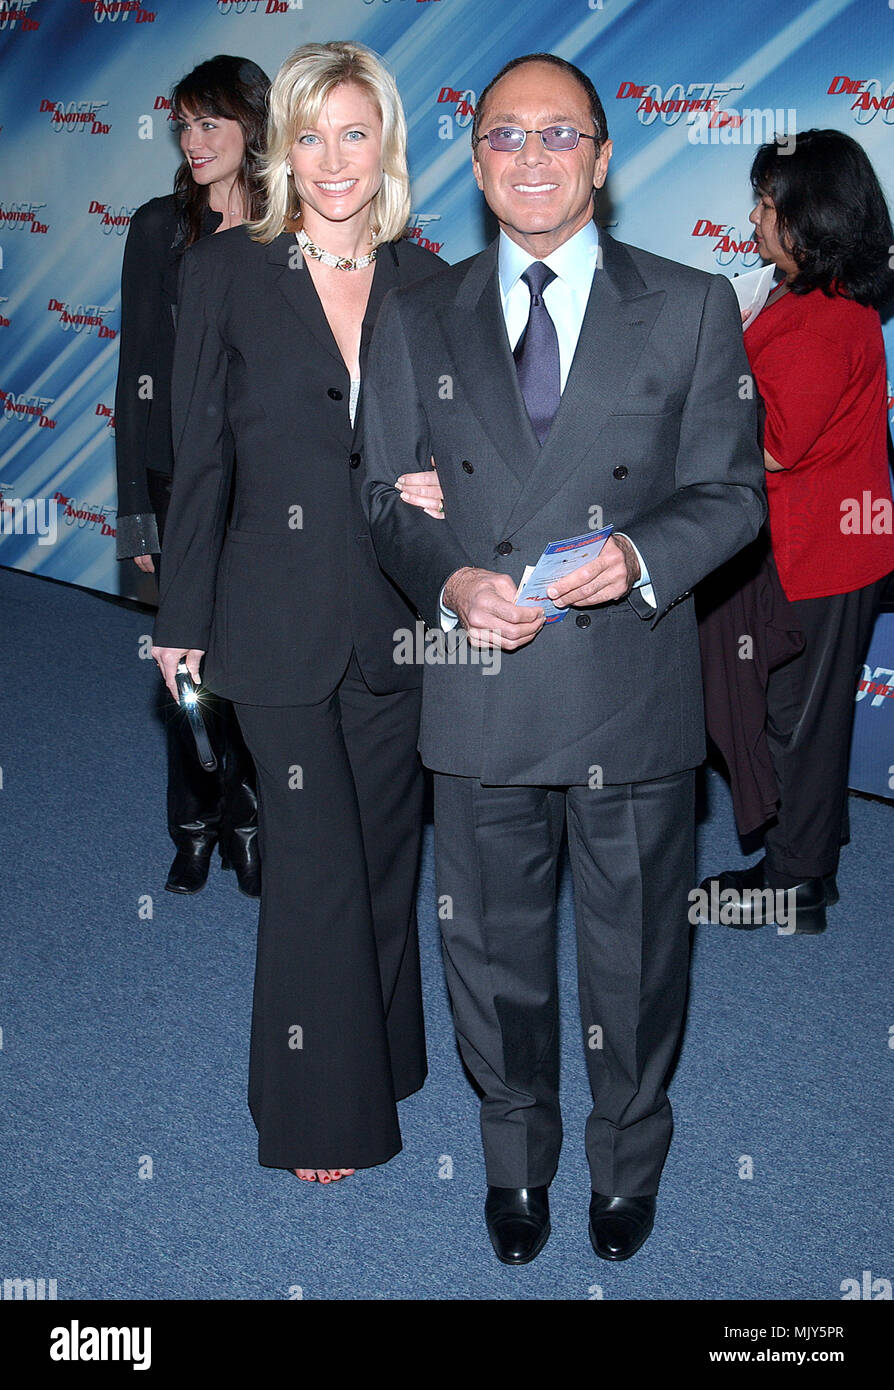 Paul Anka and wife arriving at the premiere of 'Die Another Day' at the Shrine Auditorium in Los Angeles. November 11, 2002.            -            AnkaPaul wife83.JPG           -              AnkaPaul wife83.JPGAnkaPaul wife83  Event in Hollywood Life - California,  Red Carpet Event, Vertical, USA, Film Industry, Celebrities,  Photography, Bestof, Arts Culture and Entertainment, Topix Celebrities fashion /  from the Red Carpet-, Vertical, Best of, Hollywood Life, Event in Hollywood Life - California,  Red Carpet , USA, Film Industry, Celebrities,  movie celebrities, TV celebrities, Music cel Stock Photo